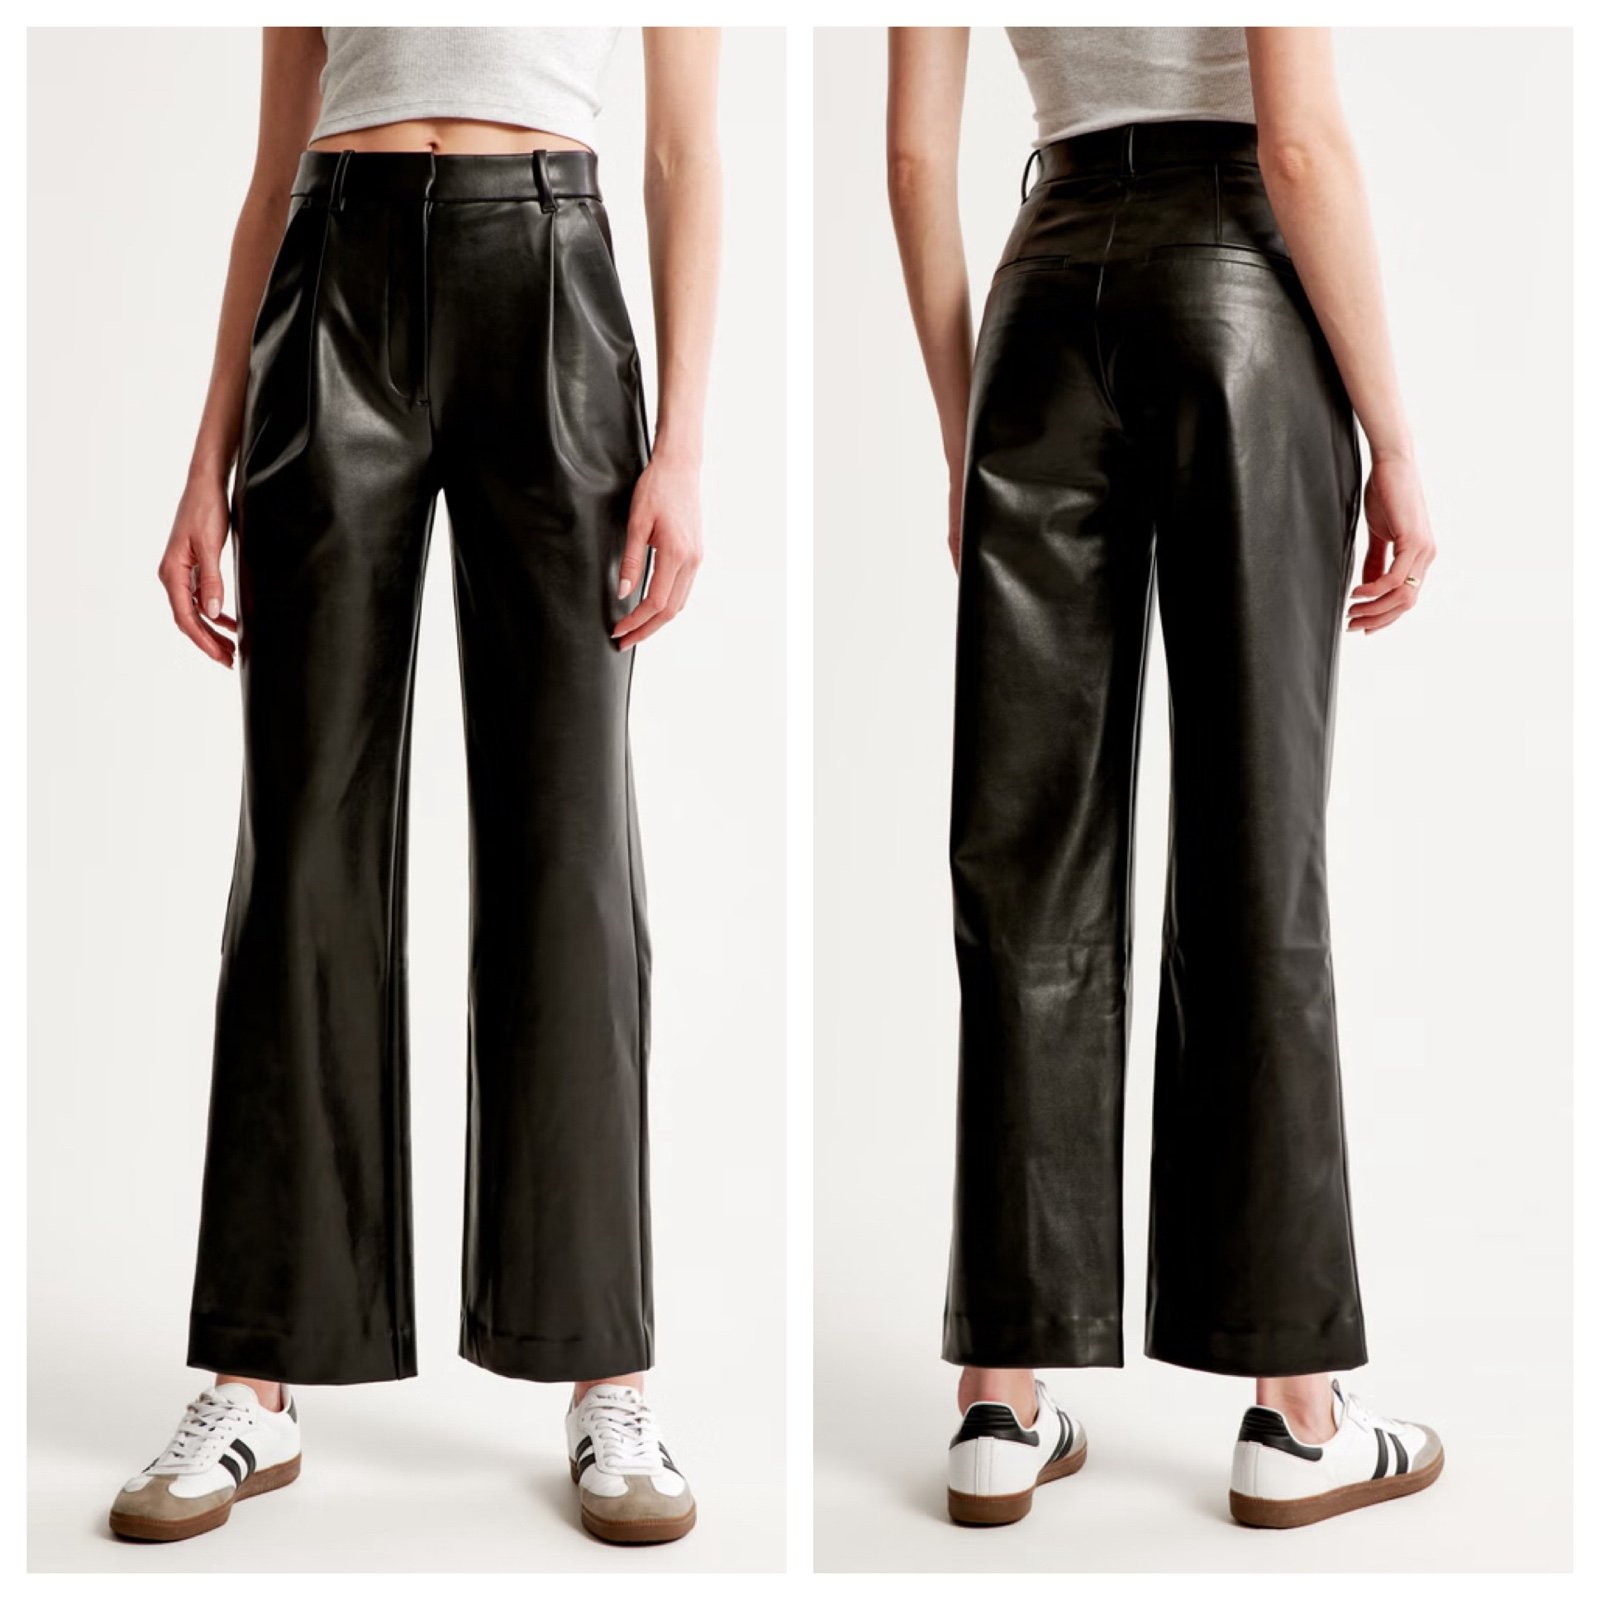 Classic abercrombie & fitch - vegan leather tailored st